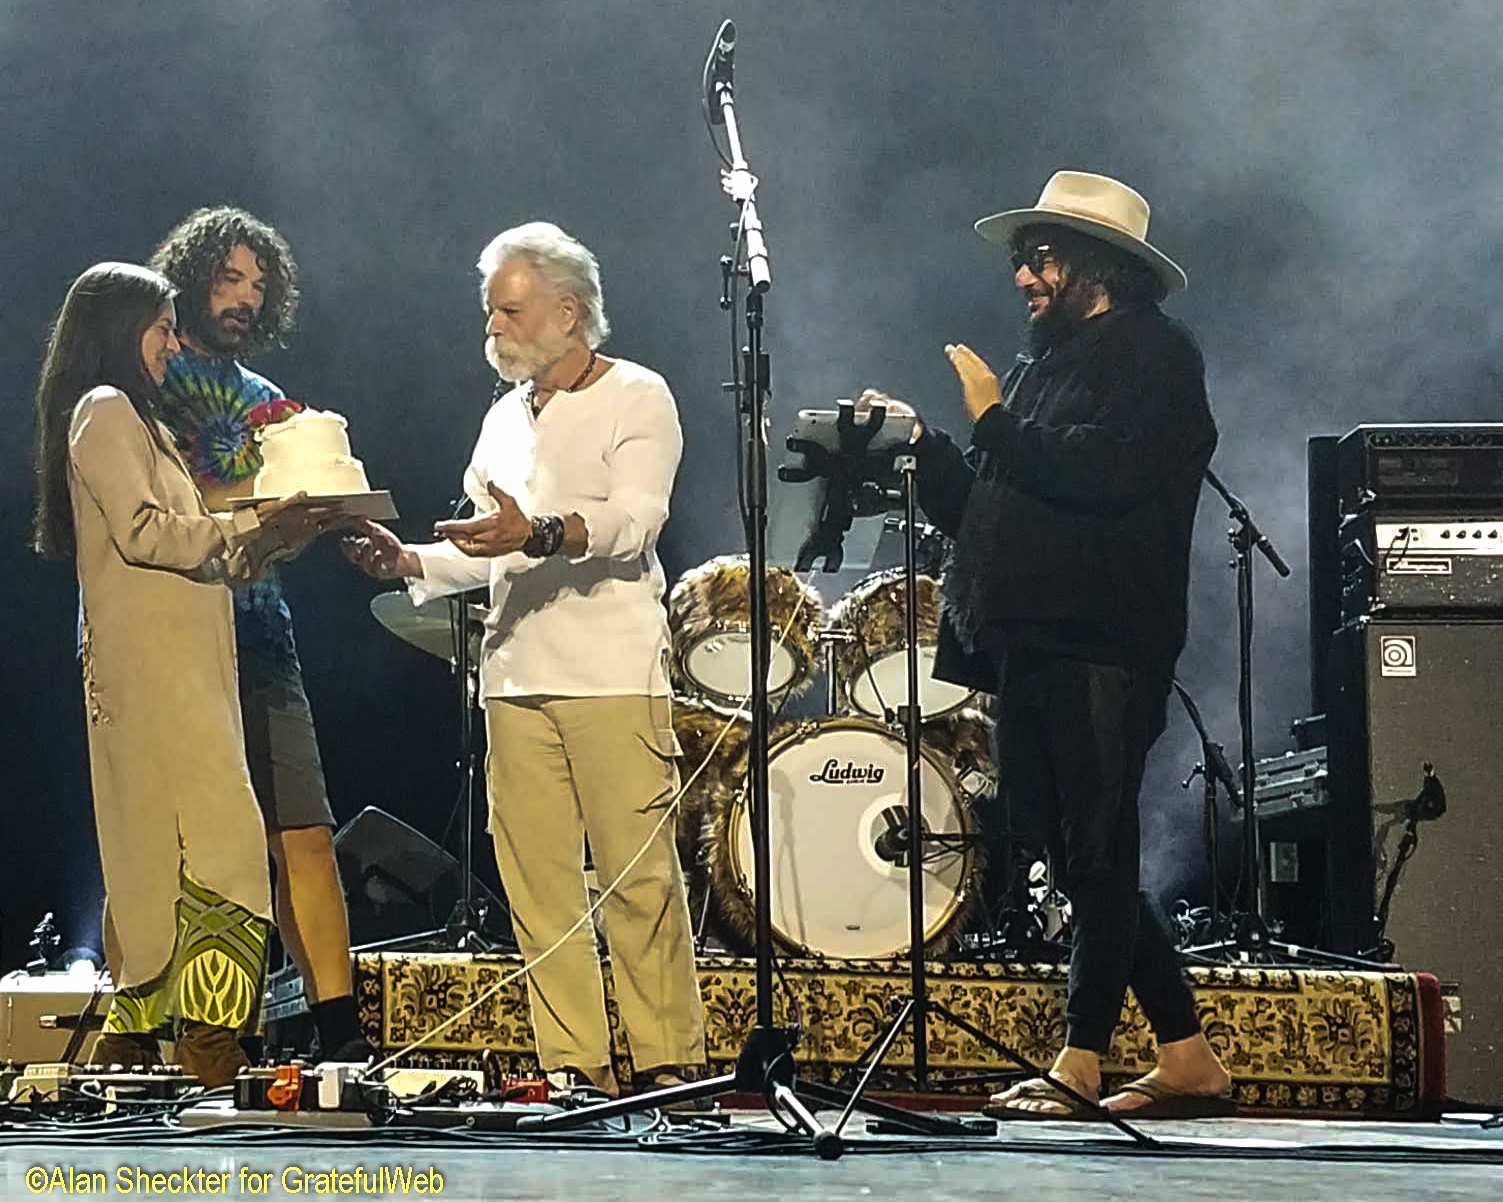 Natasha Weir does her part to share Bob Weir's 71st birthday with the audience